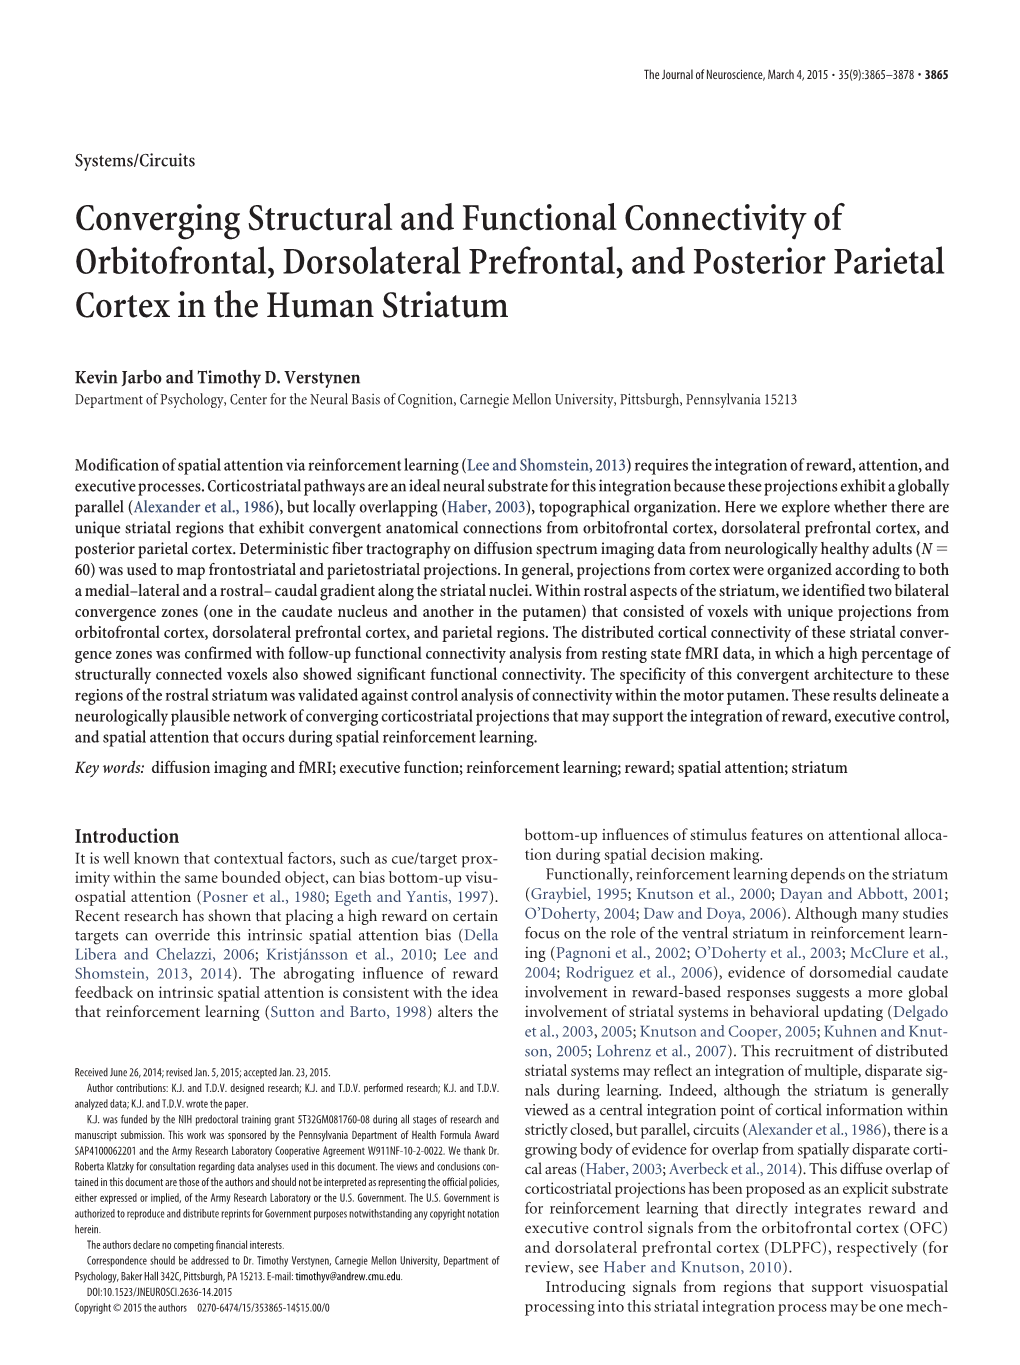 Converging Structural and Functional Connectivity of Orbitofrontal, Dorsolateral Prefrontal, and Posterior Parietal Cortex in the Human Striatum